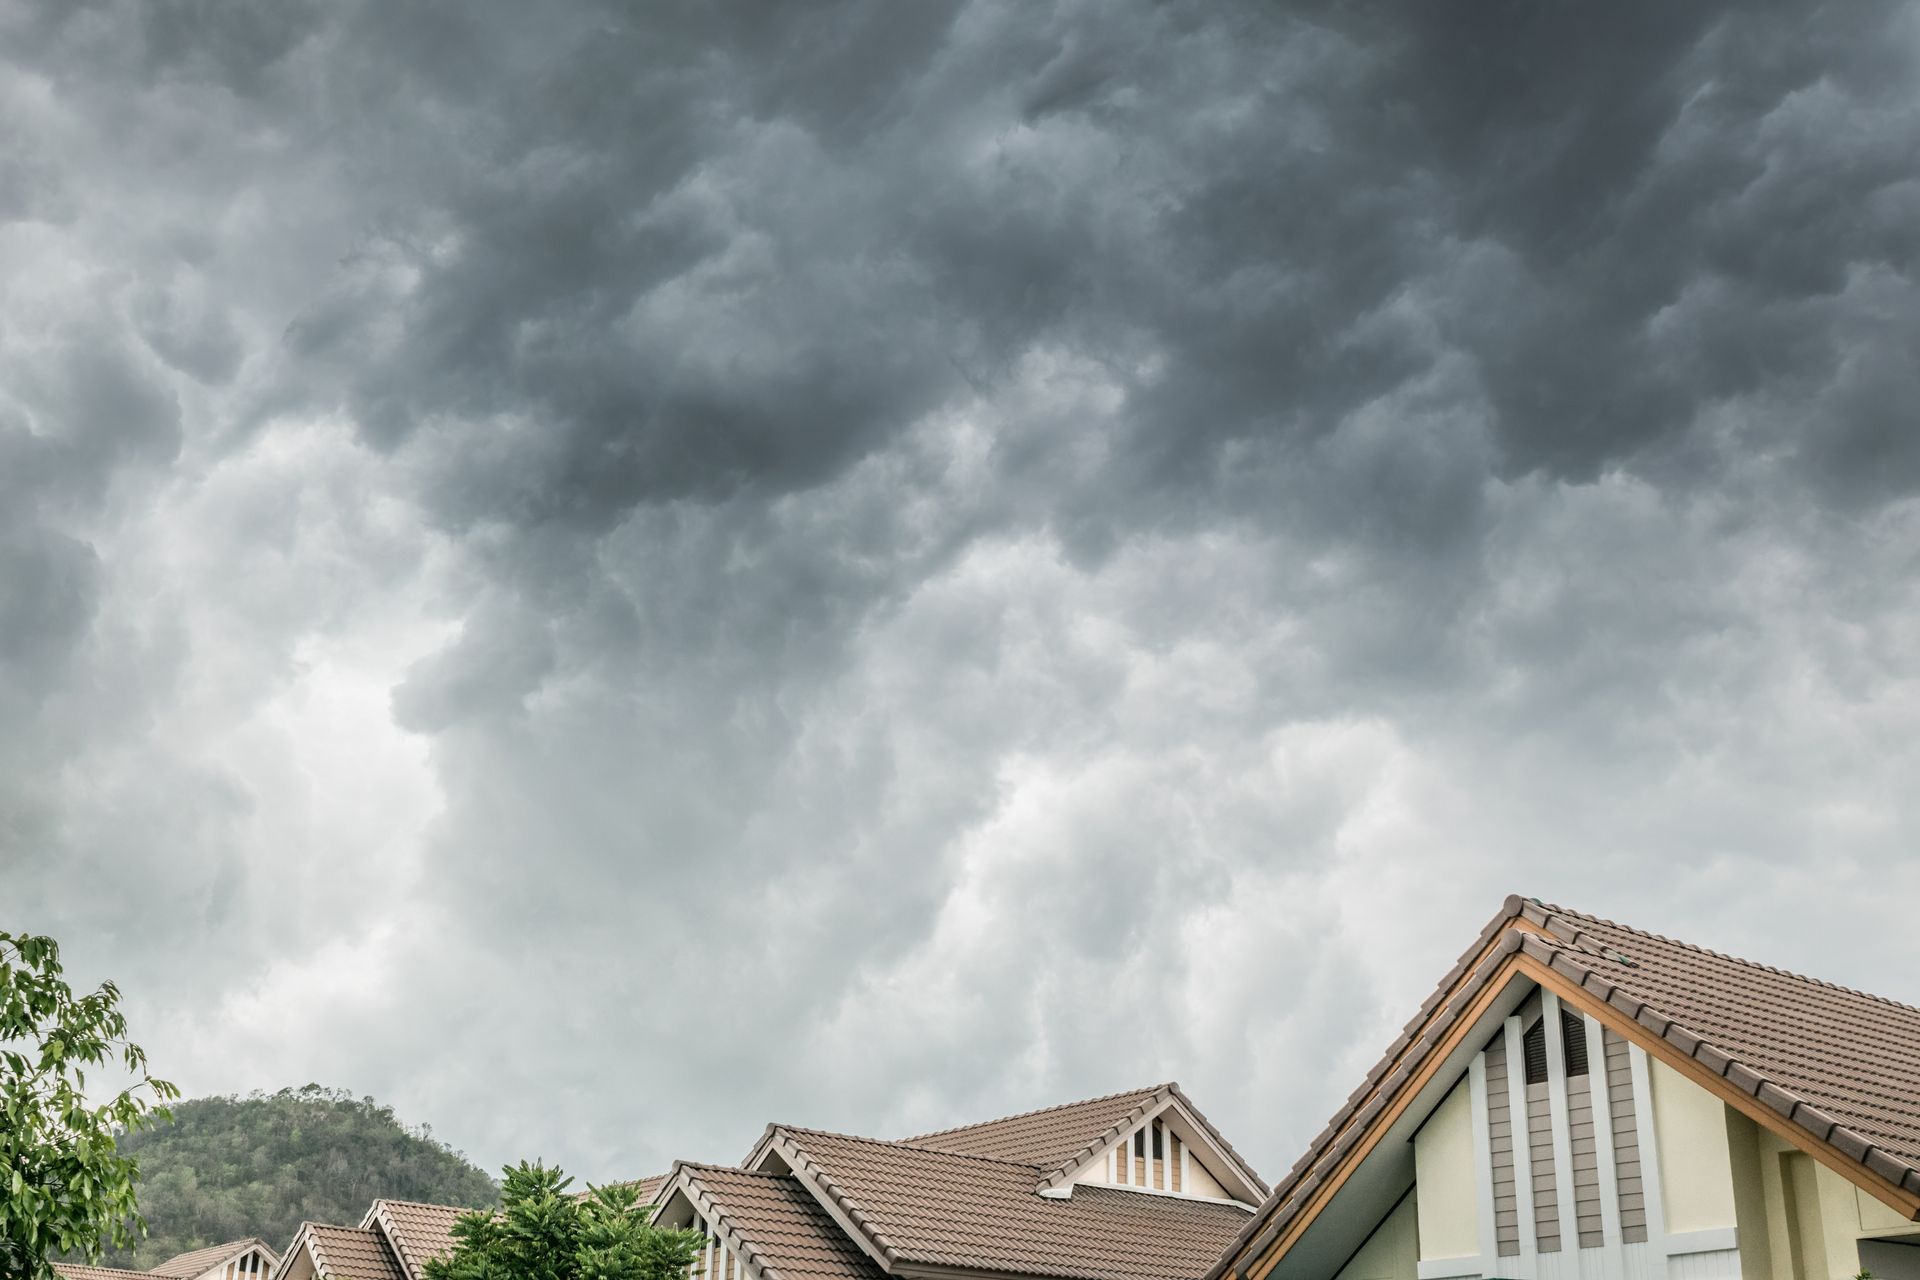 Benefits of post-storm roof inspections